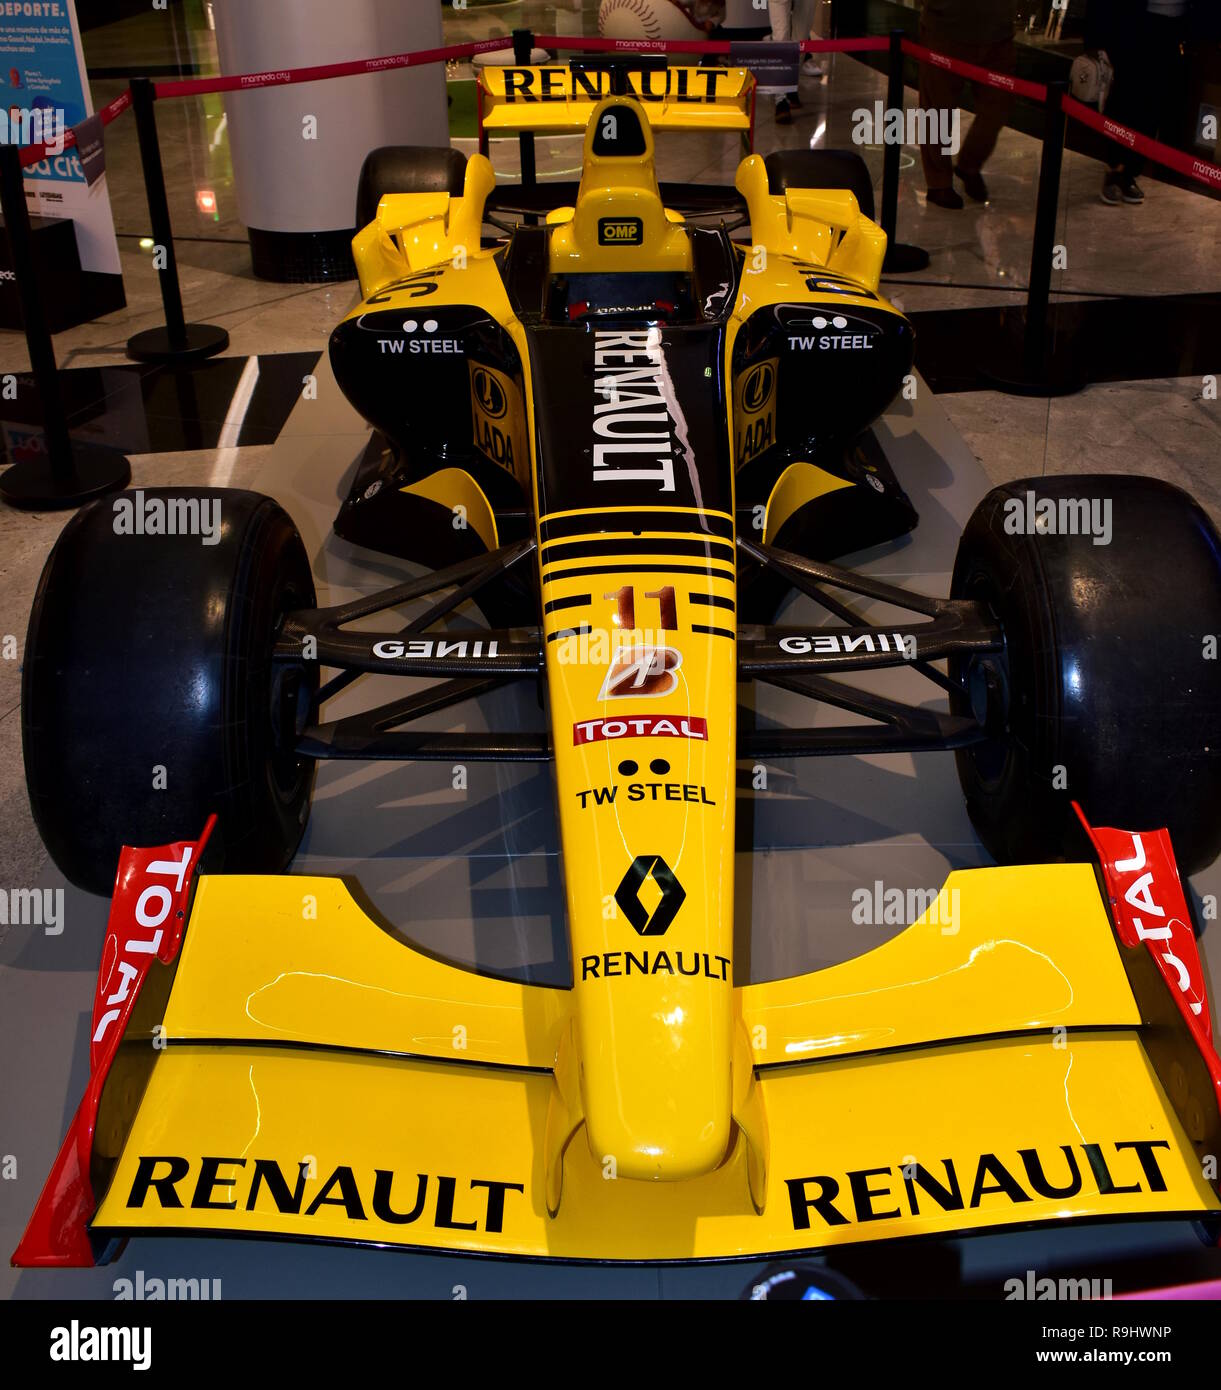 Renault R30 Formula One car driven by Robert Kubica in a mall Stock Photo -  Alamy